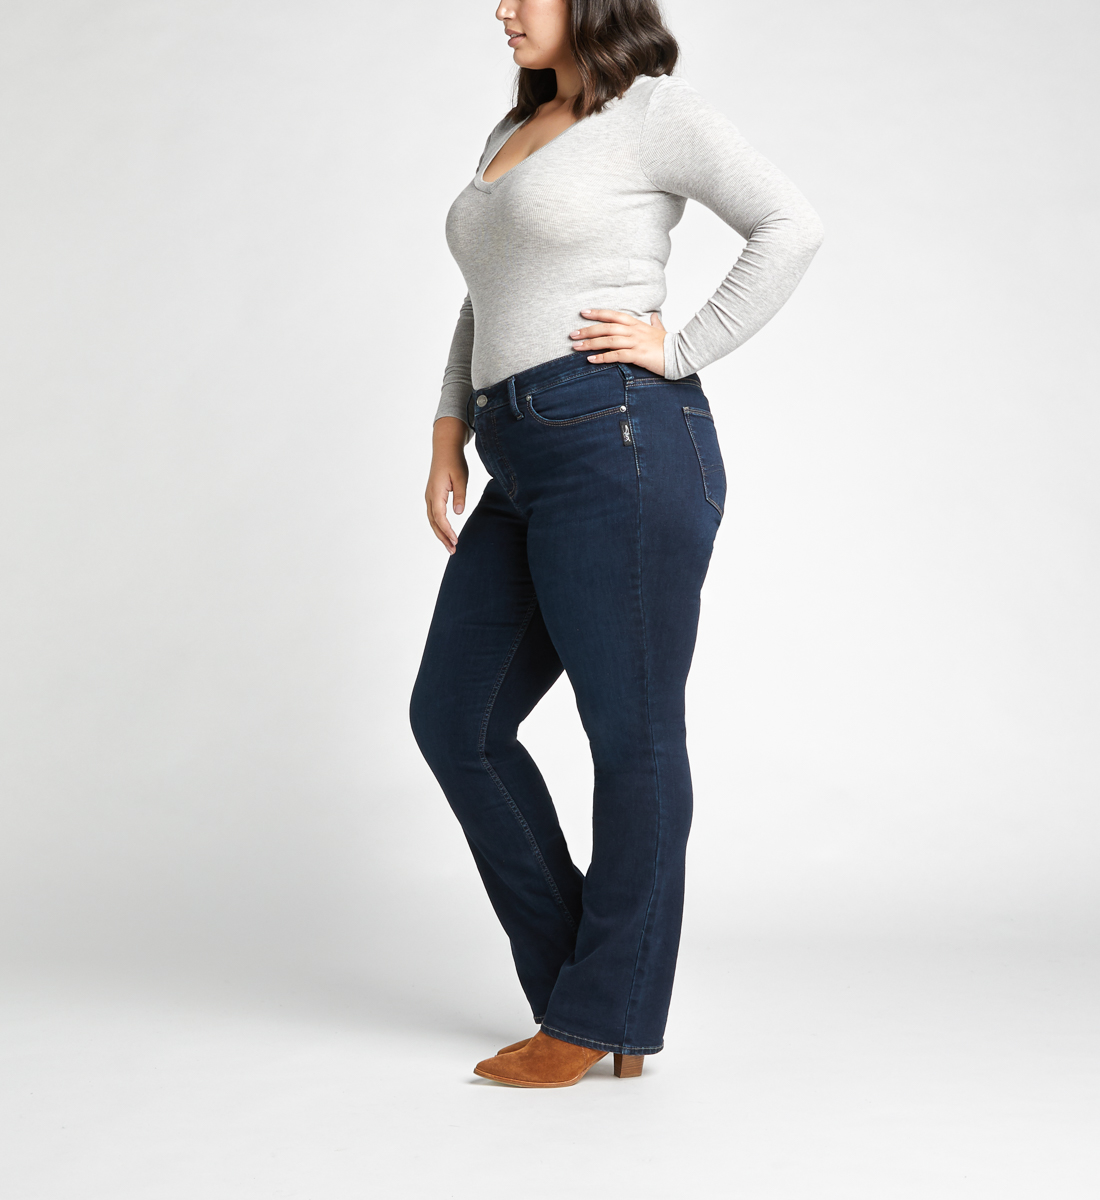 Avery High Rise Slim Bootcut Jeans Plus Size - Silver Jeans US